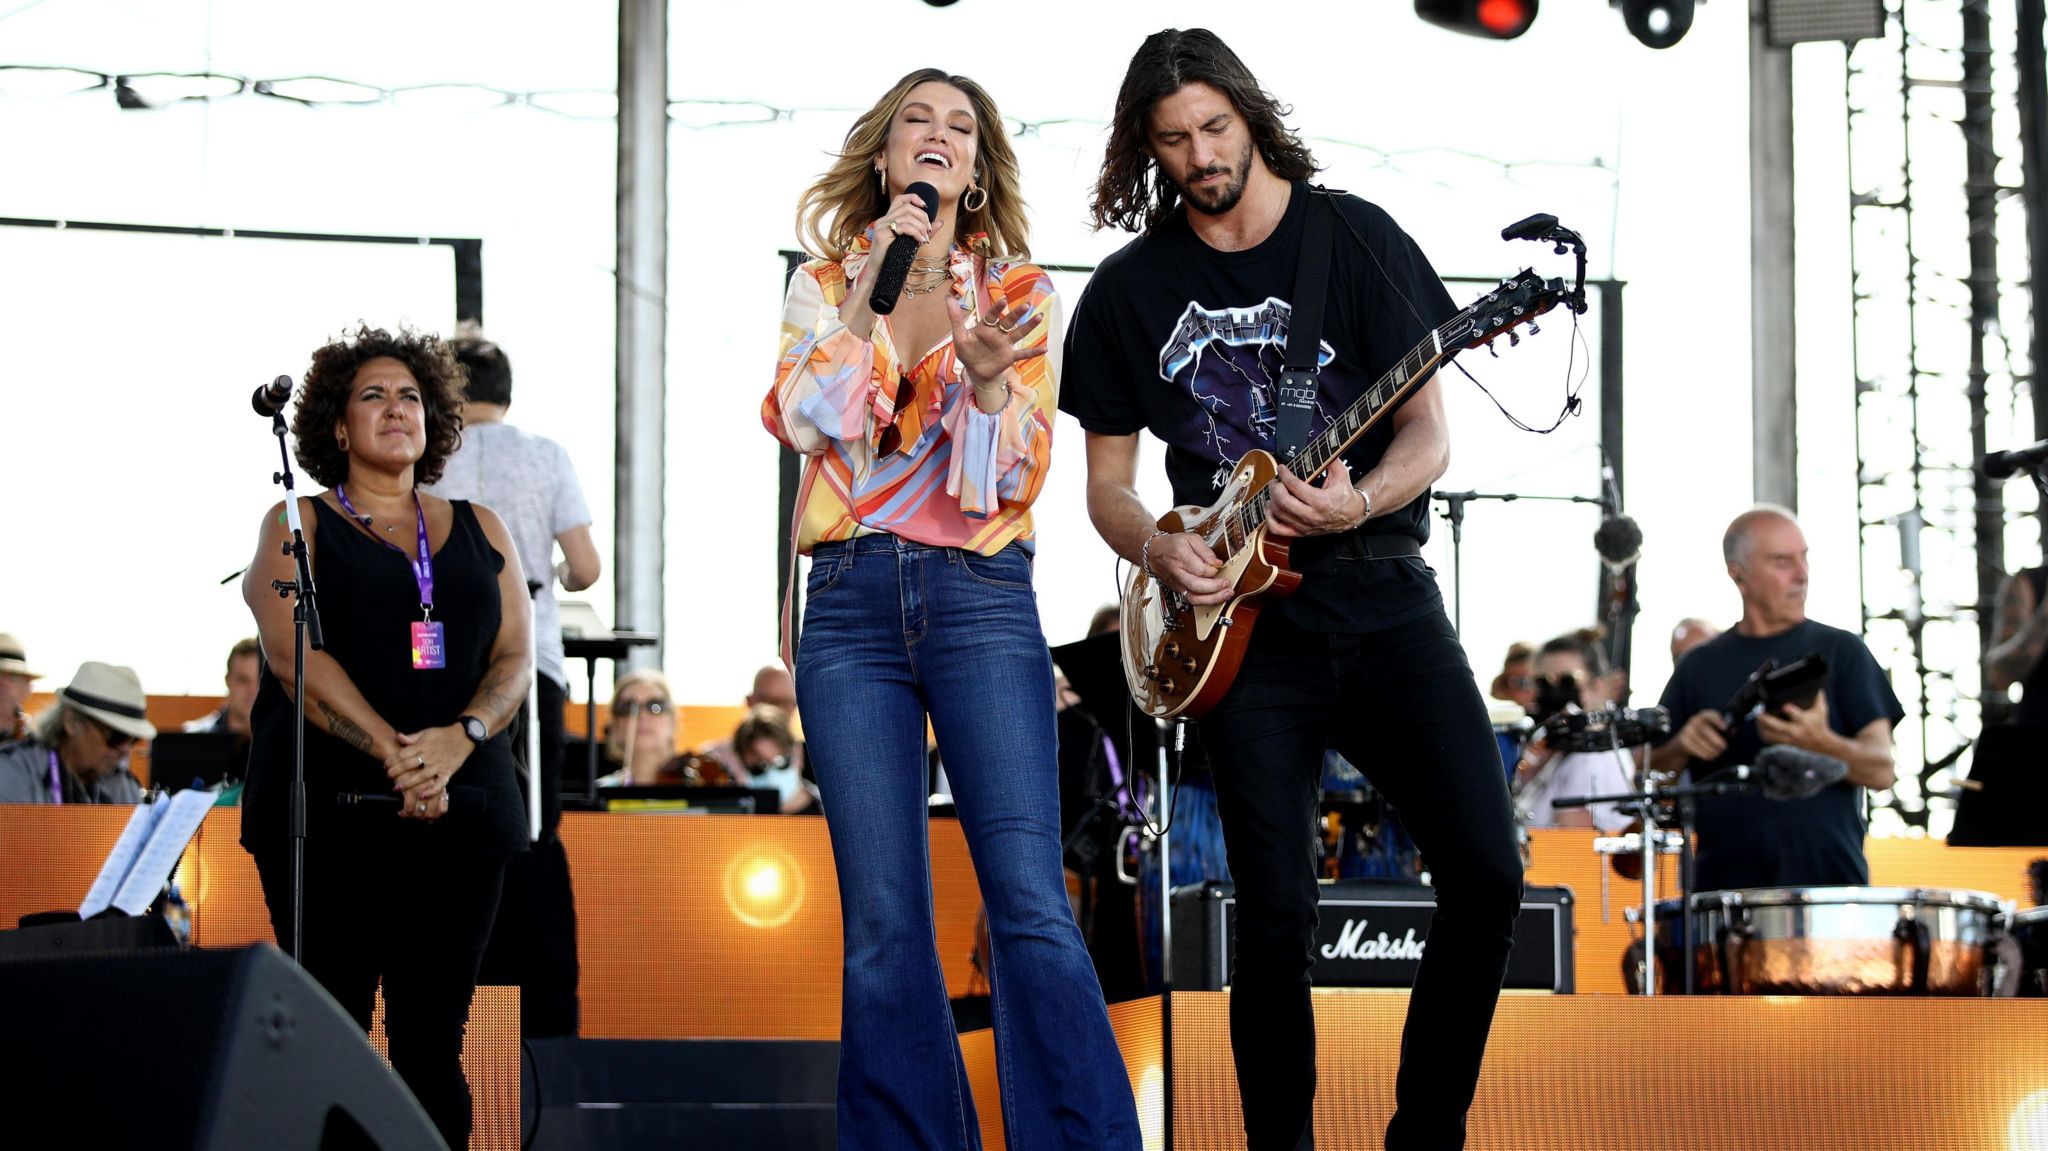 Delta is performing with Matthew Copley. She is wearing a multicolour top and jeans. He is standing next to her in a black t-shirt and black jeans and is playing the guitar. 